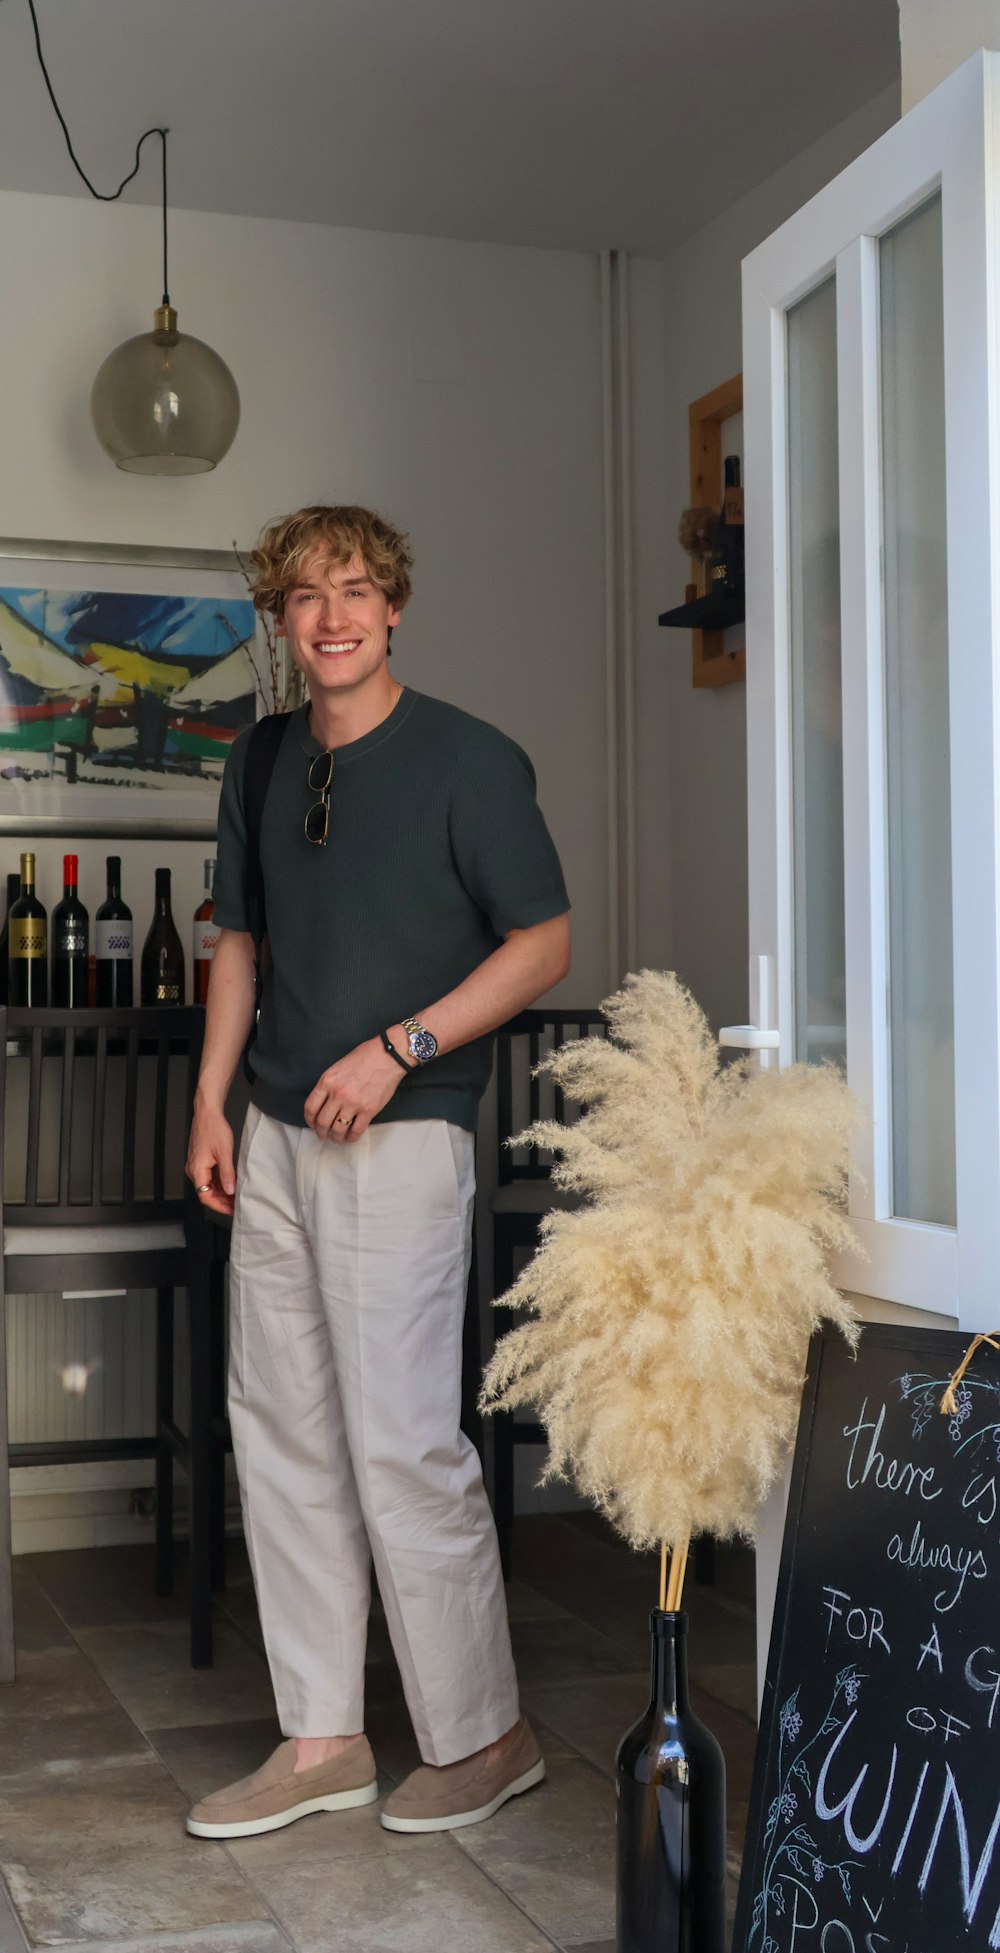 a man standing next to a bottle of wine